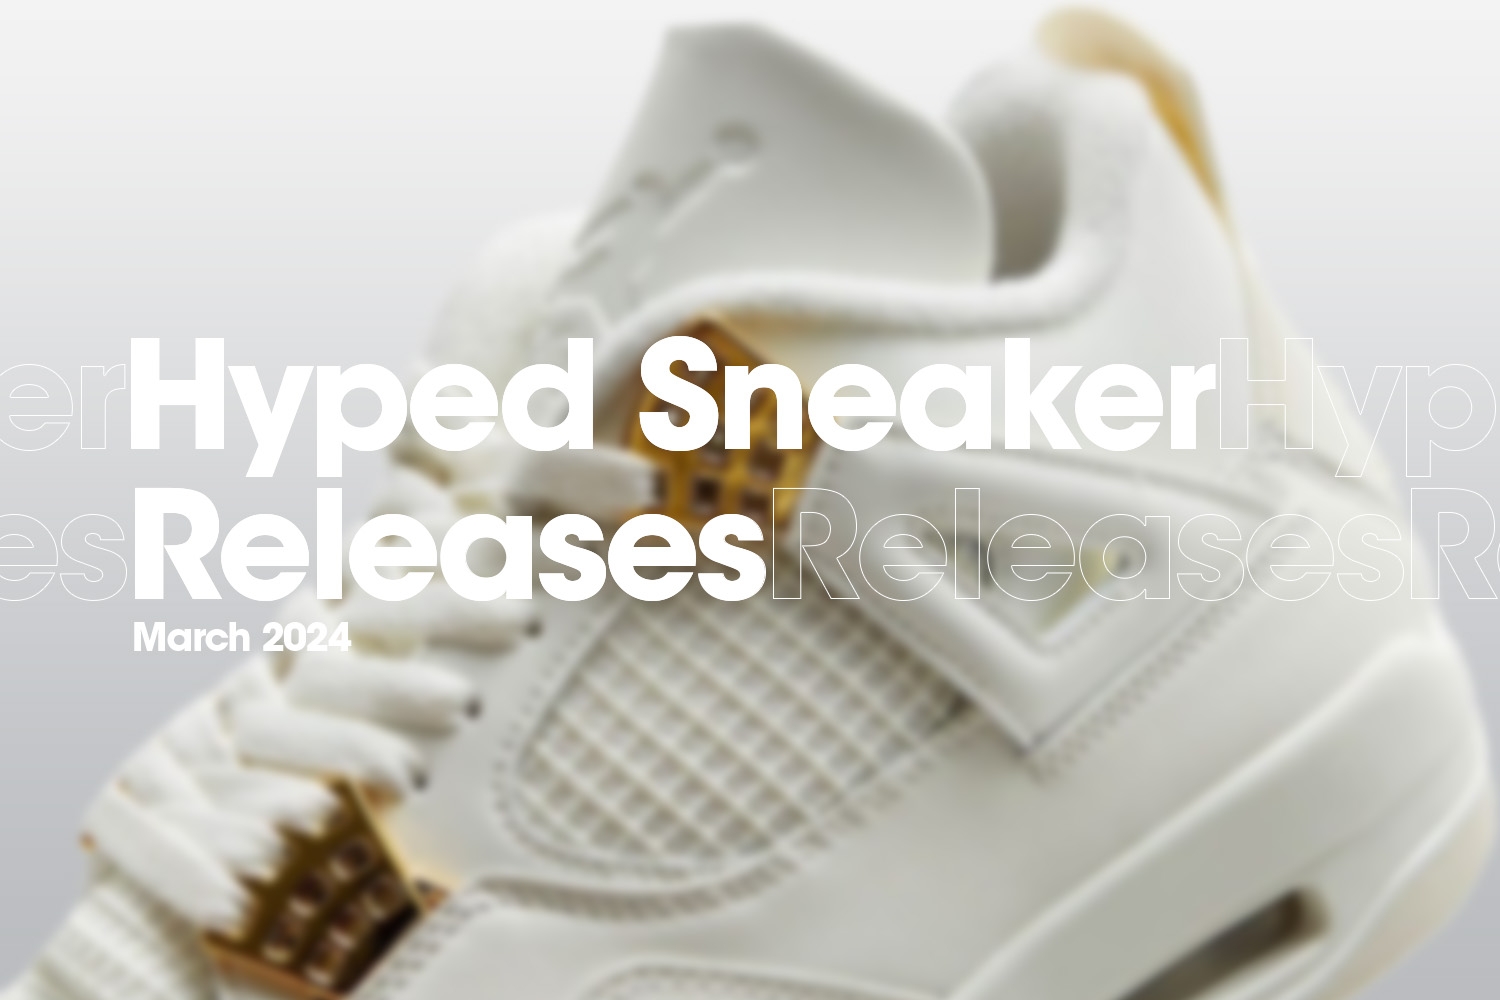 Hyped Sneaker Releases of March 2024